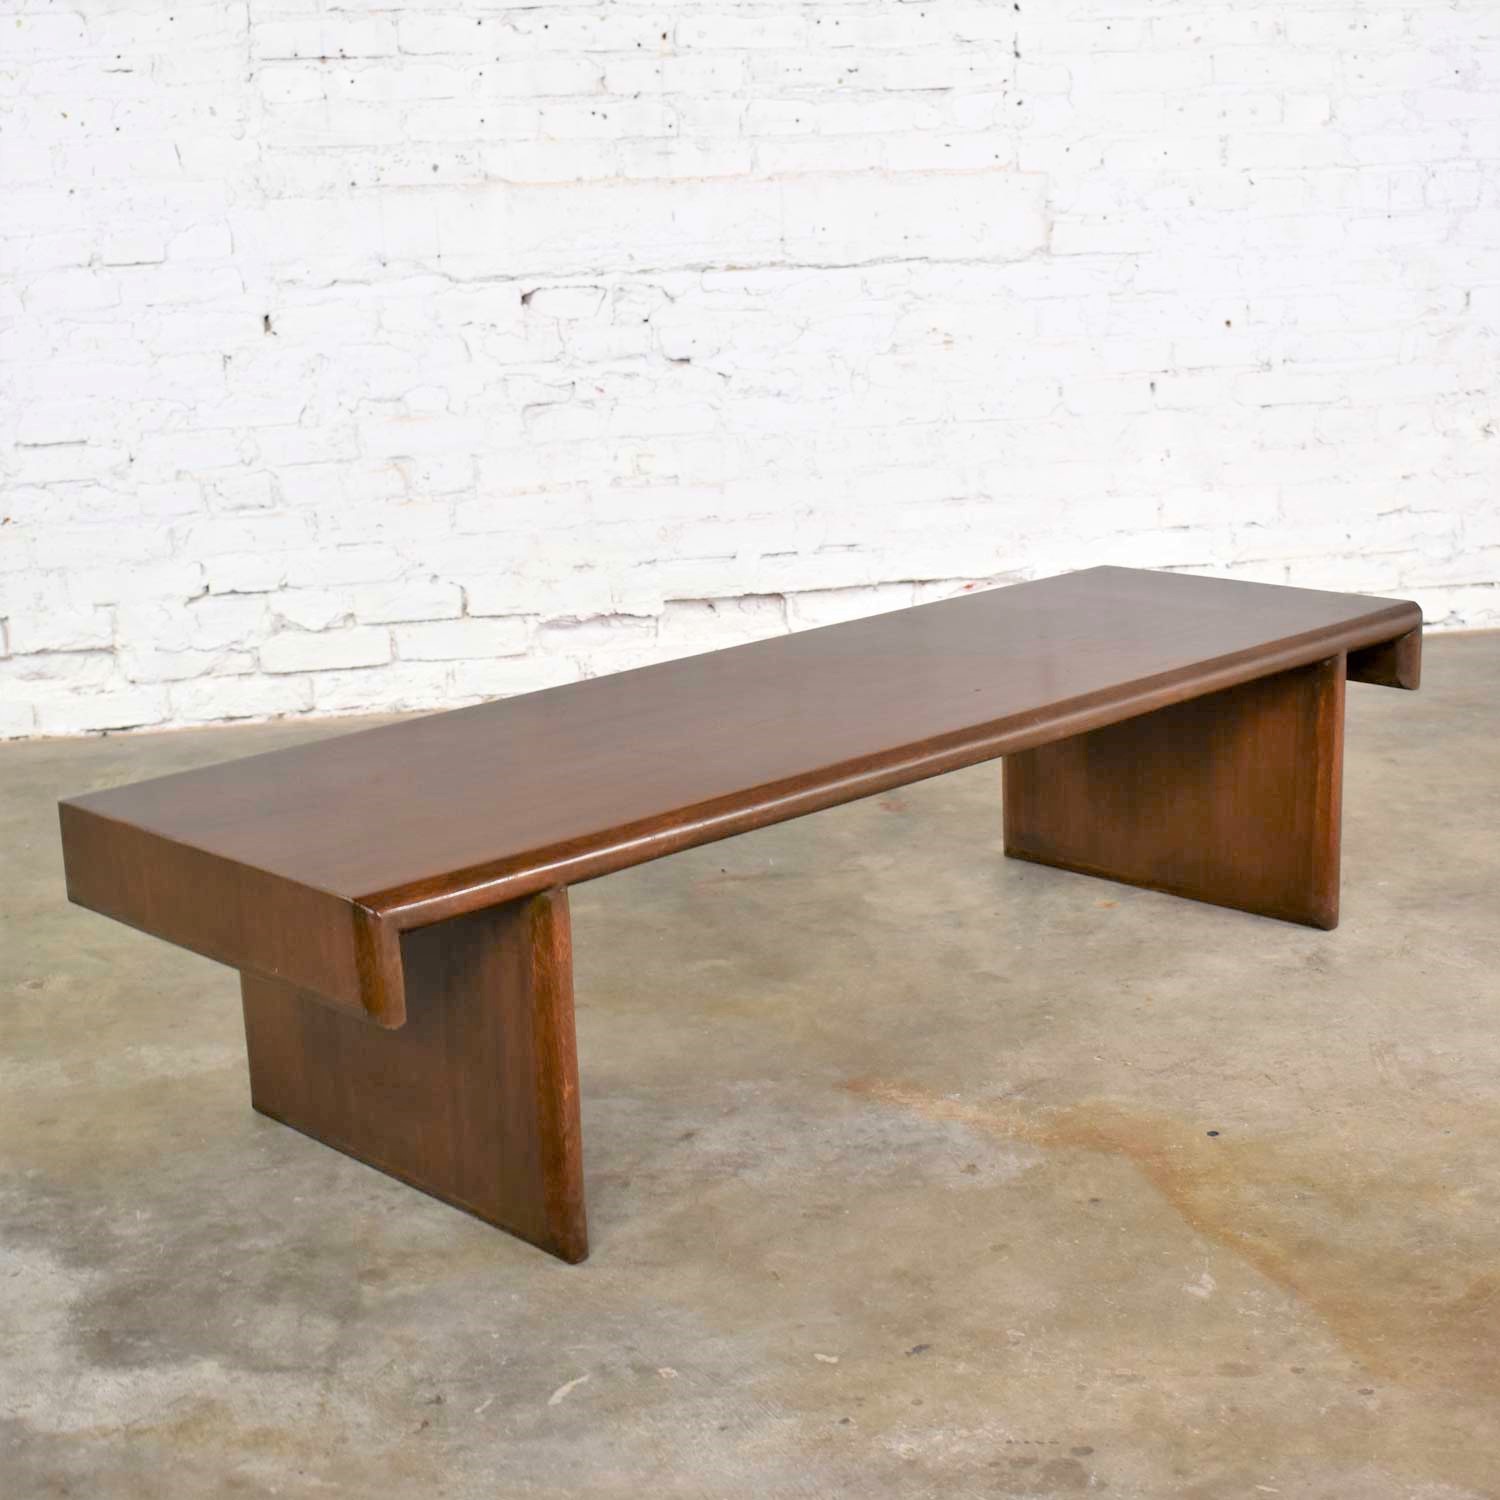 Vintage Walnut Stained Mahogany Bench Coffee Table Style of Frank Lloyd Wright for Henredon